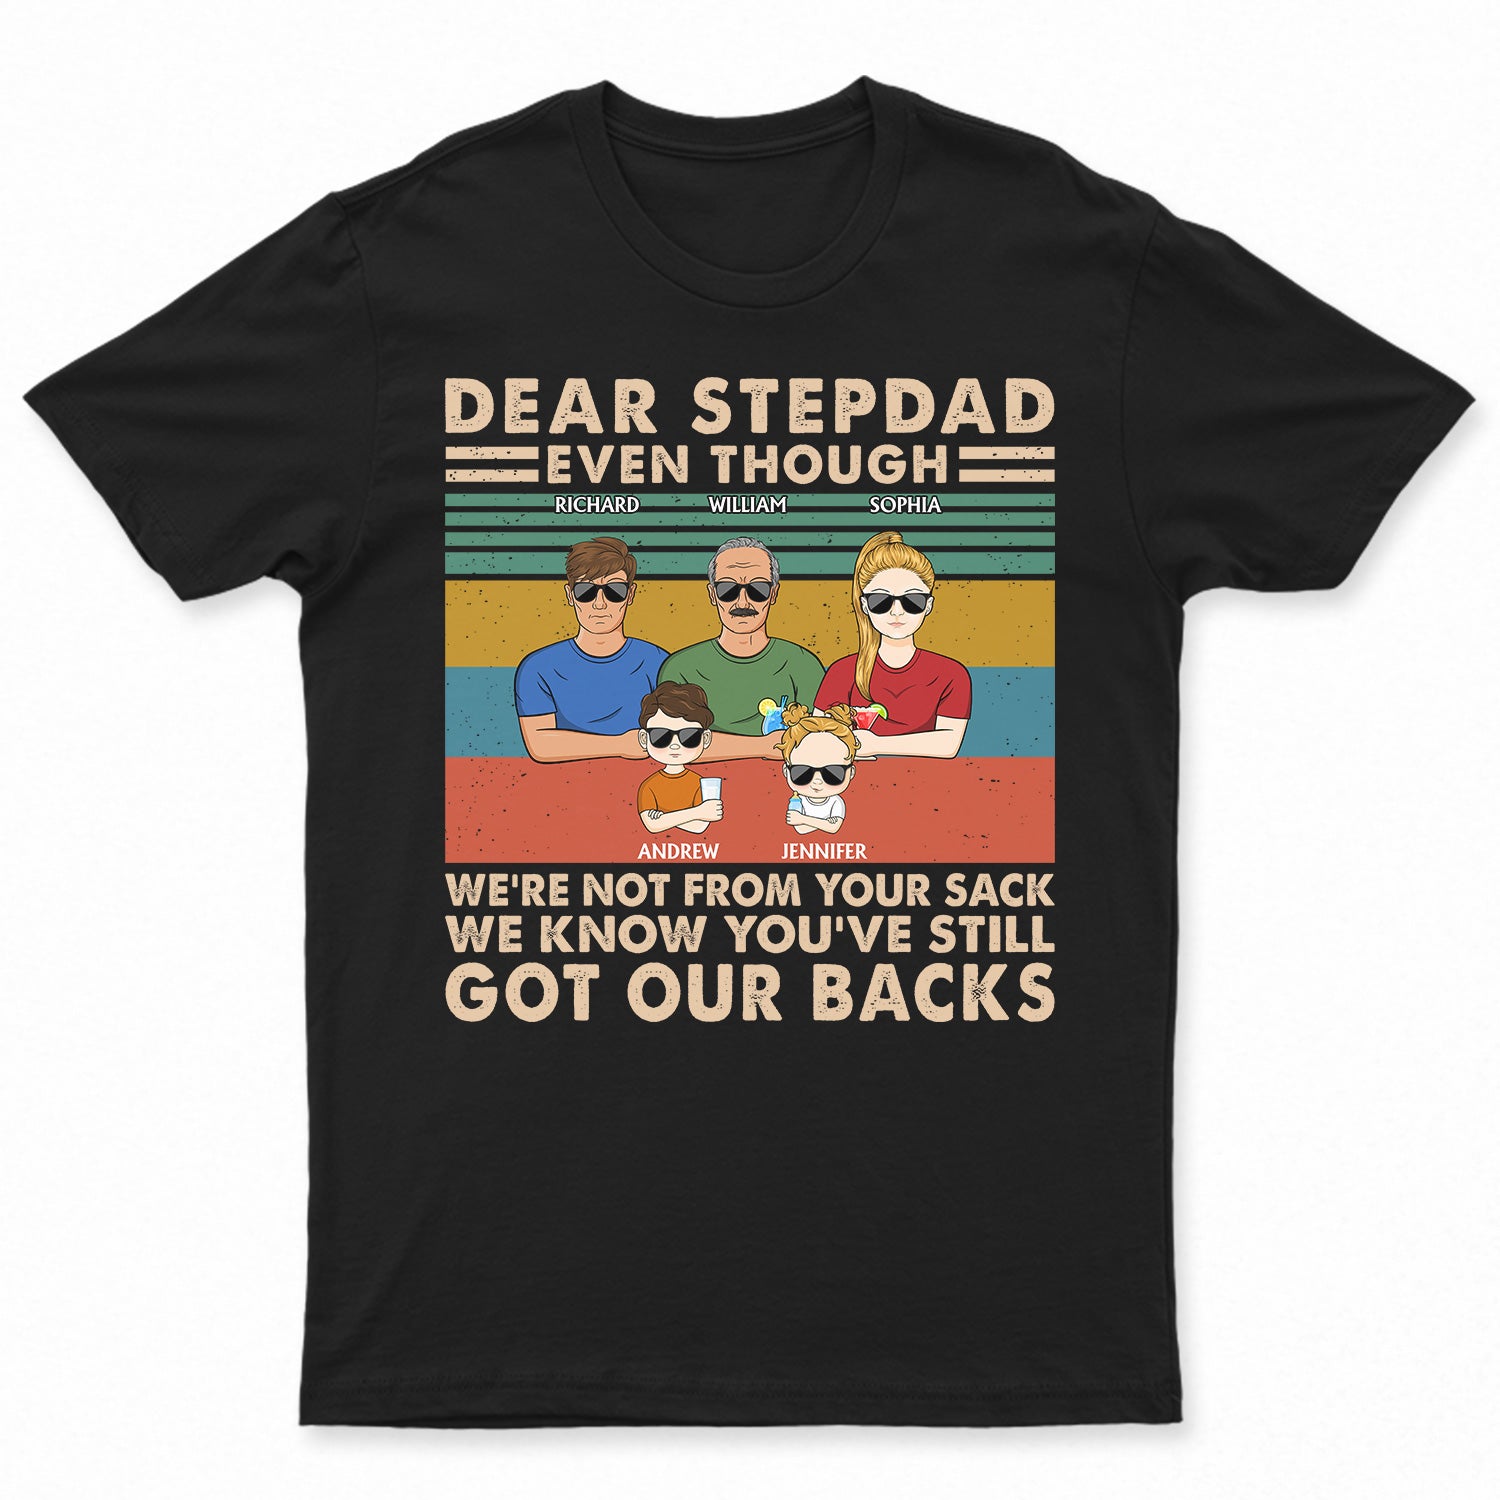 Even Though I'm Not From Your Sack - Birthday, Loving Gift For Stepdad, Stepfather, Bonus Dad, Insta-dad - Personalized Custom T Shirt